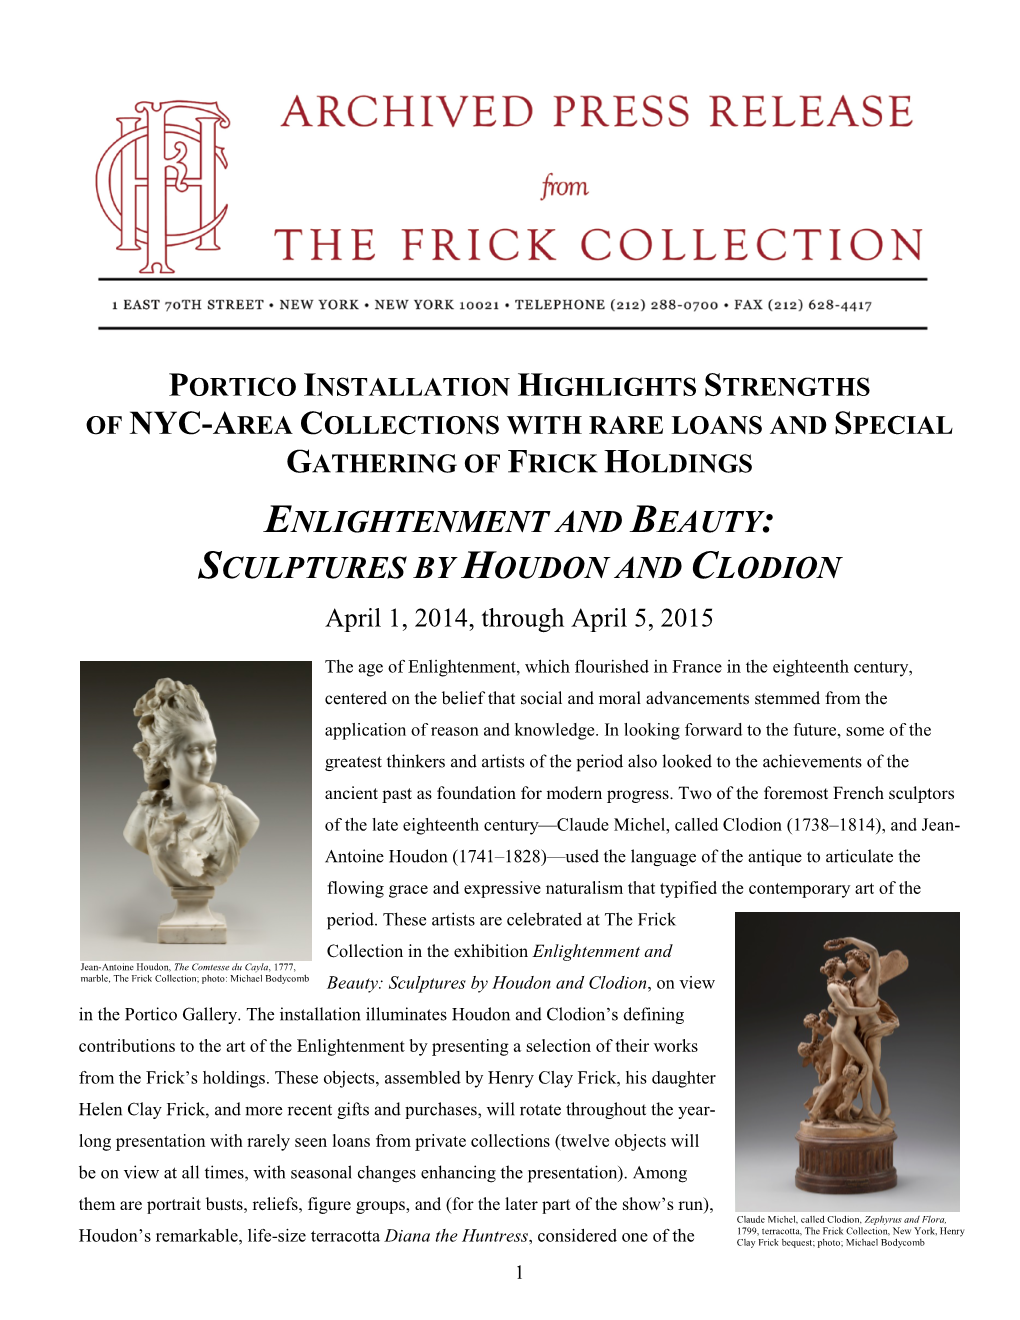 Sculptures by Houdon and Clodion